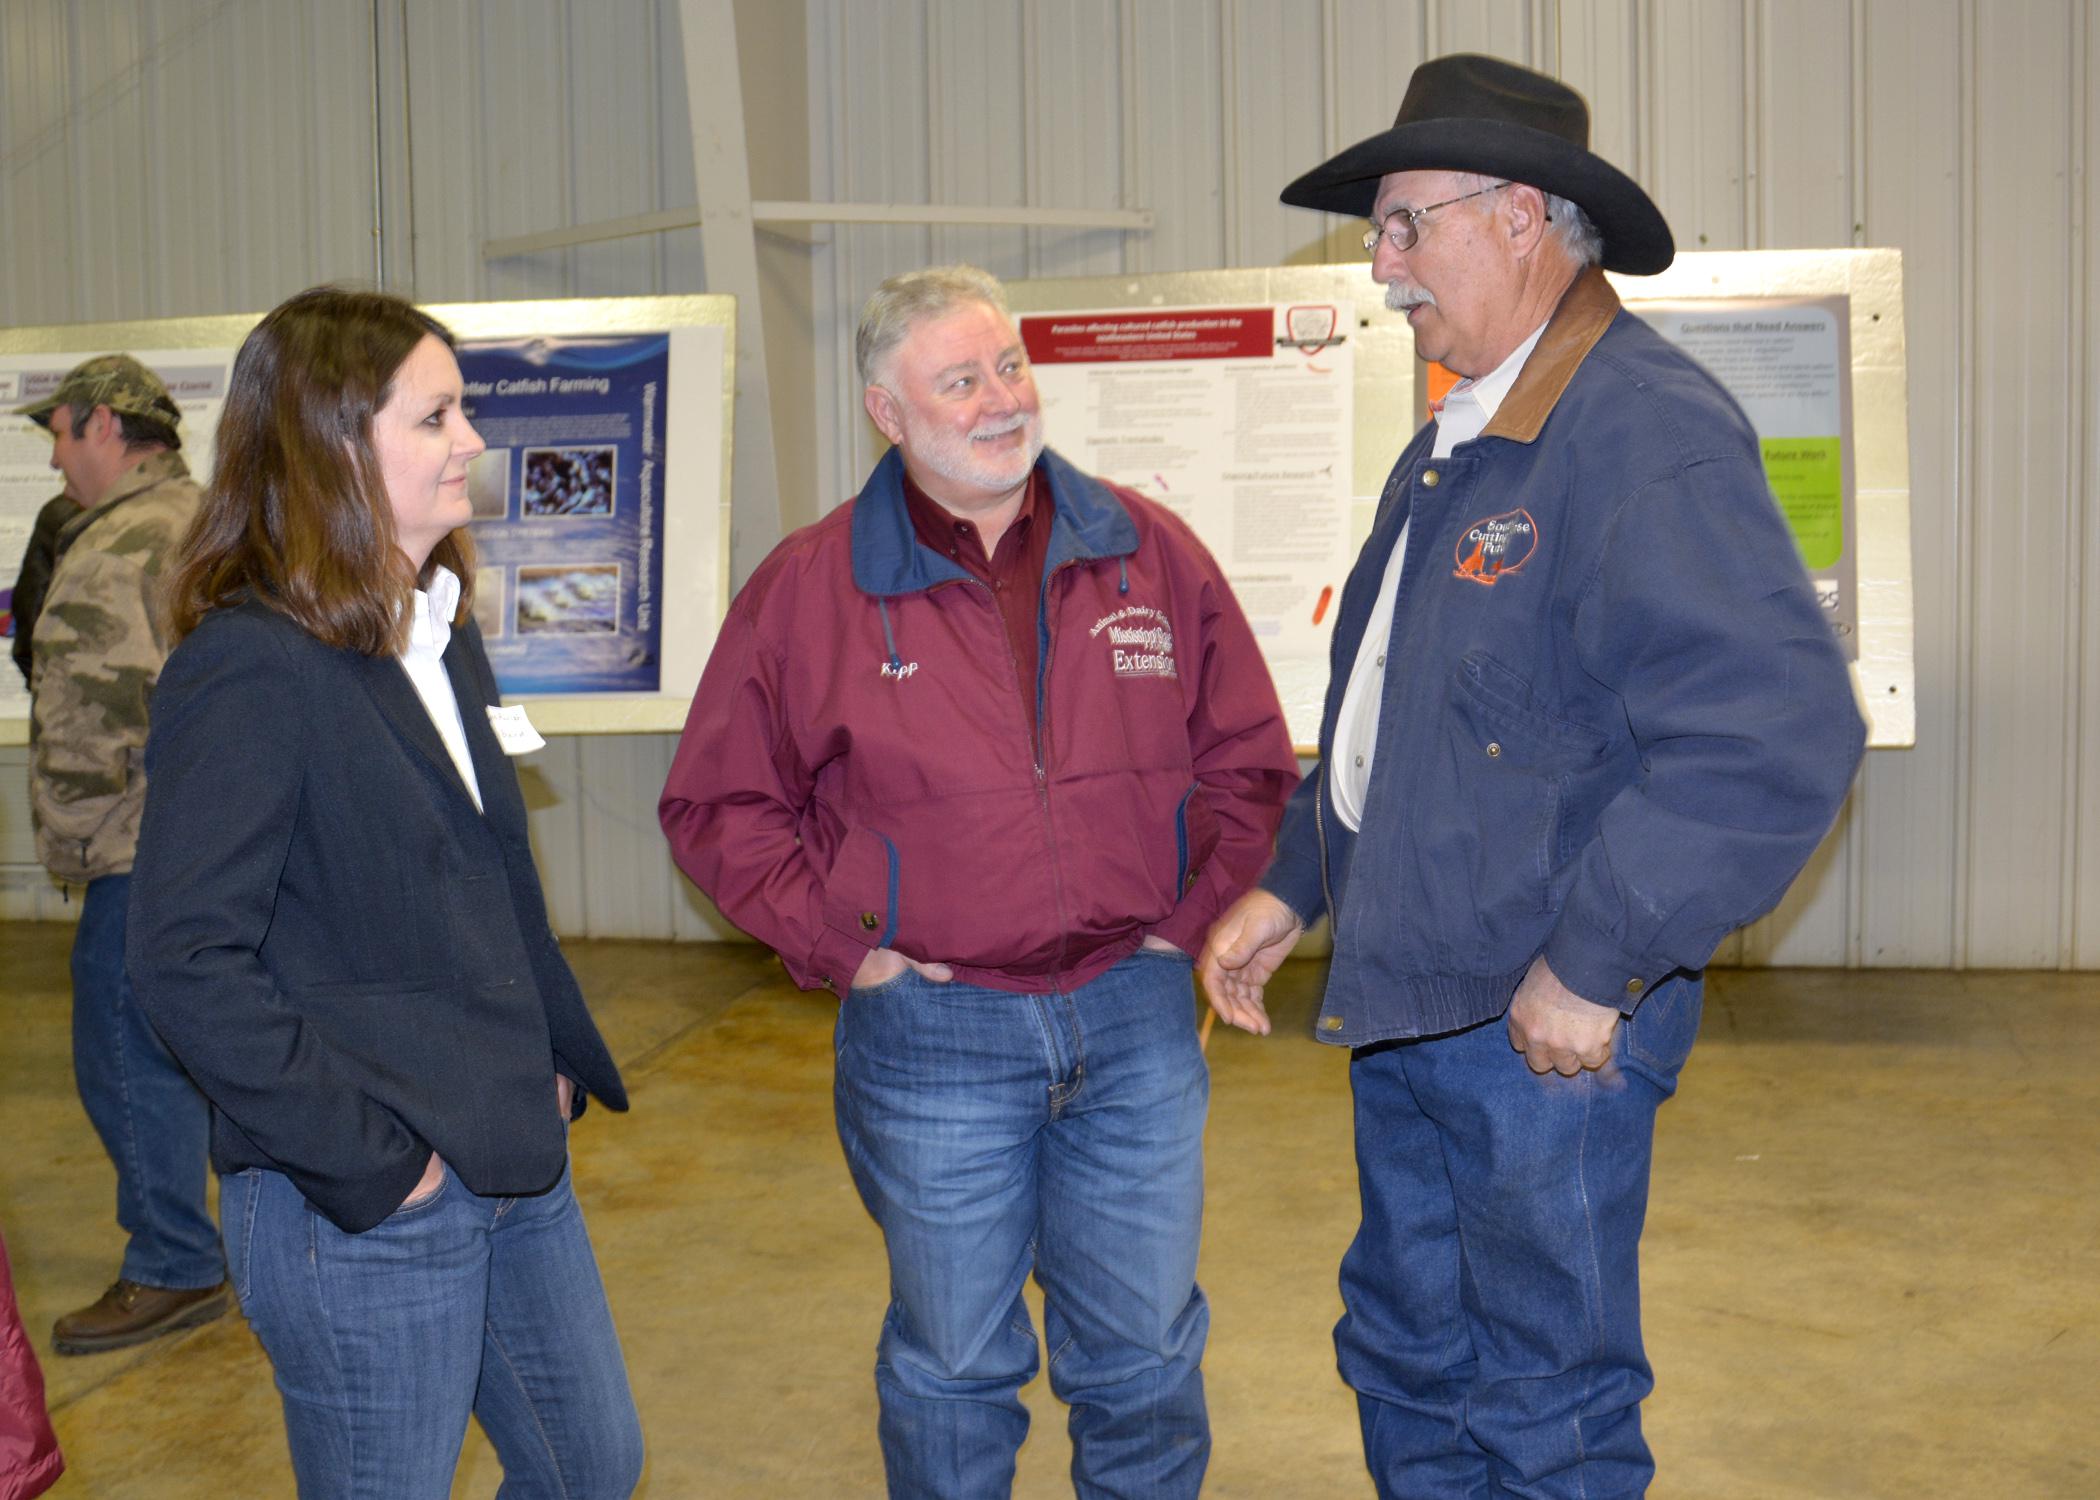 Jane Parish, extension and research professor of animal science with Mississippi State University, and Kipp Brown, area extension associate in Carroll County, visit with Webster County horseman John Fondren at the North Mississippi Research and Extension Center Producer Advisory Council meeting in Verona, Mississippi, on Feb. 19, 2015. (Photo by MSU Ag Communications/Linda Breazeale)